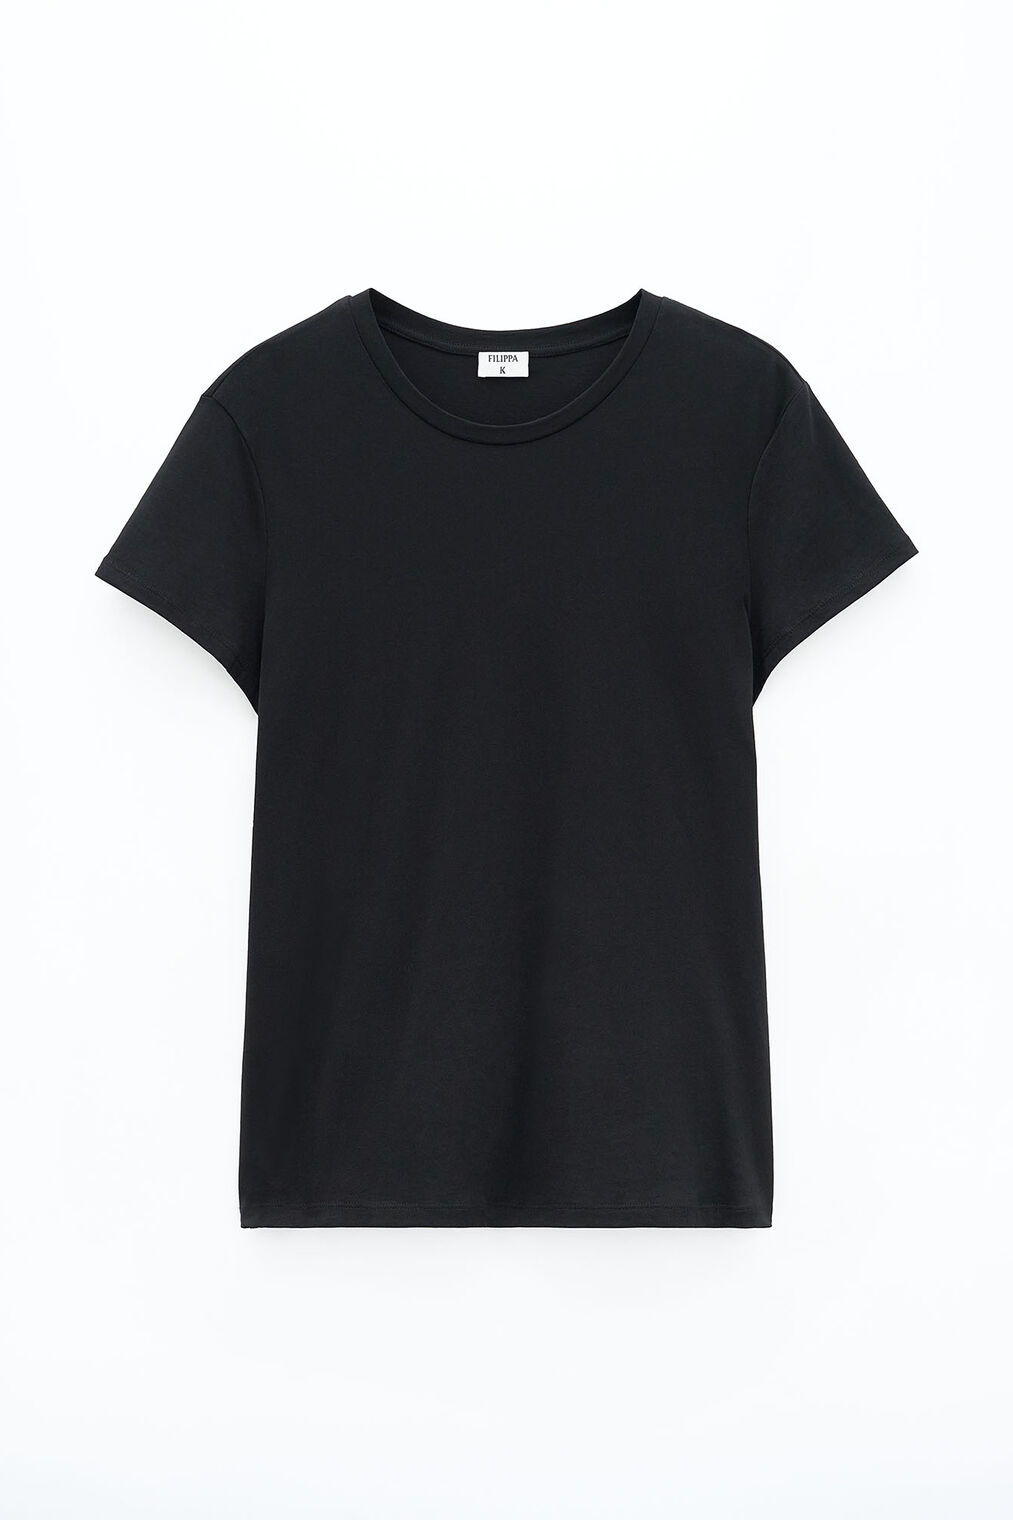 Soft cotton tee in black